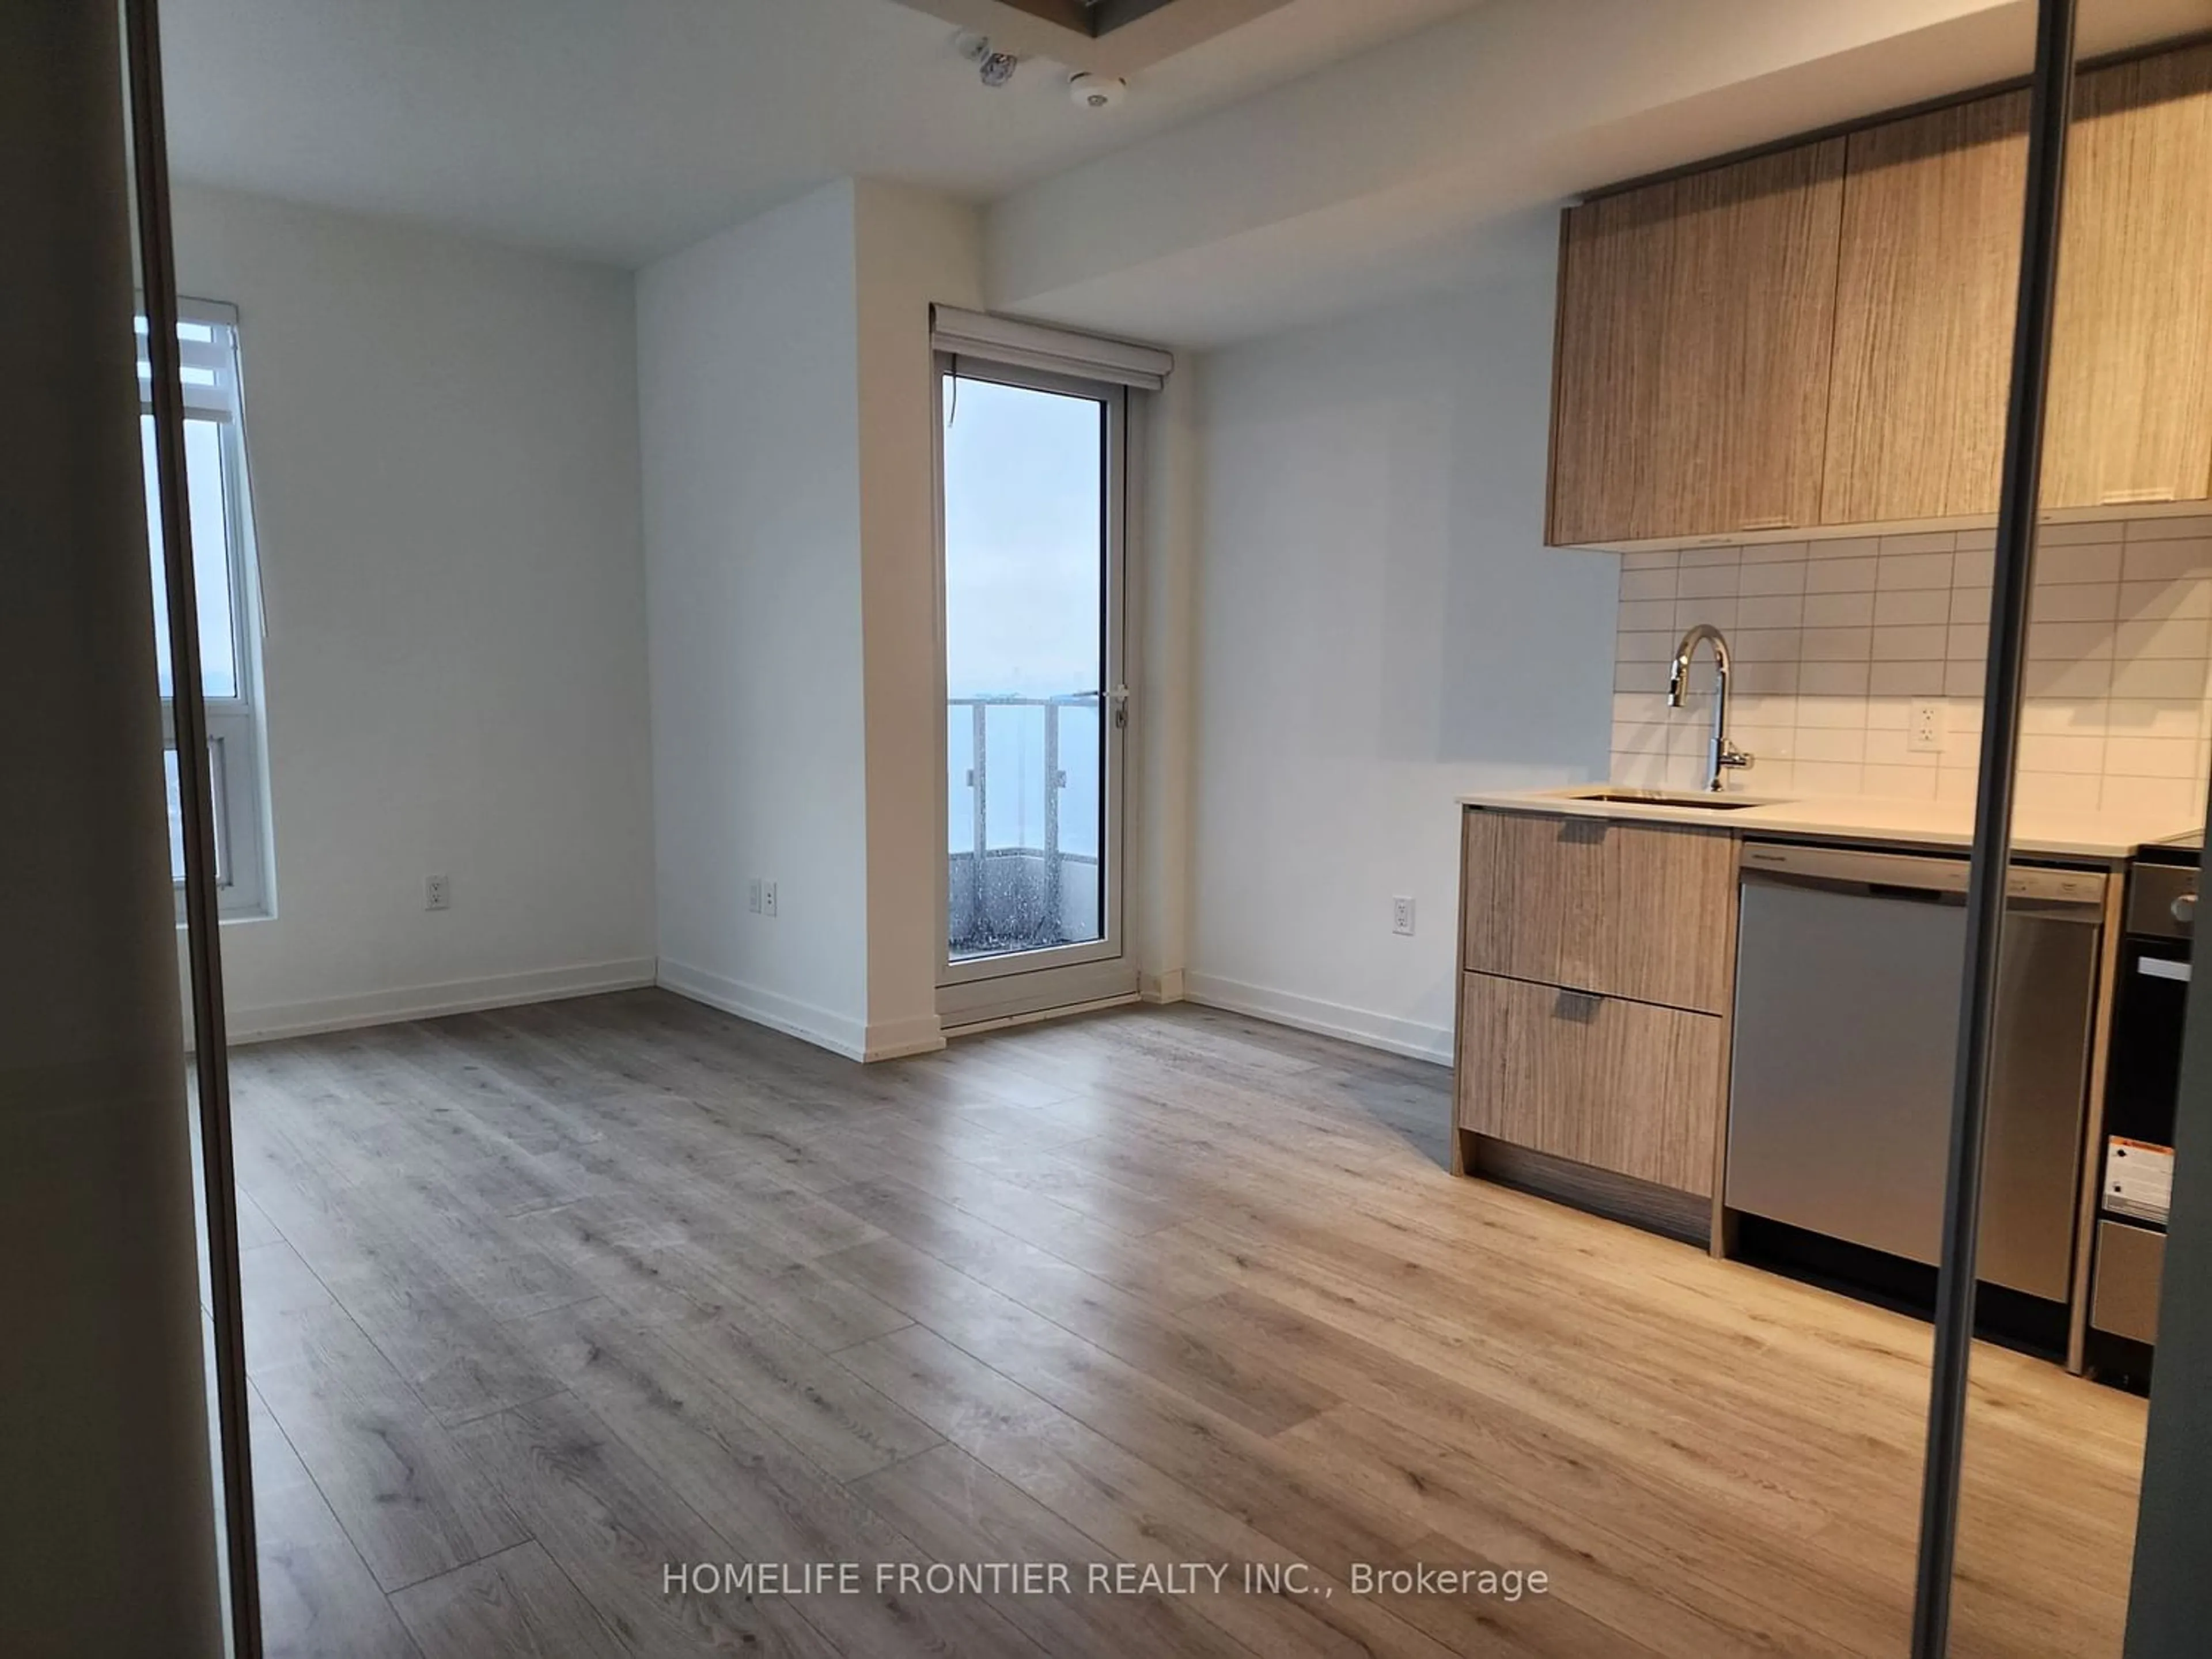 A pic of a room for 395 Bloor St #3606, Toronto Ontario M4W 0B4